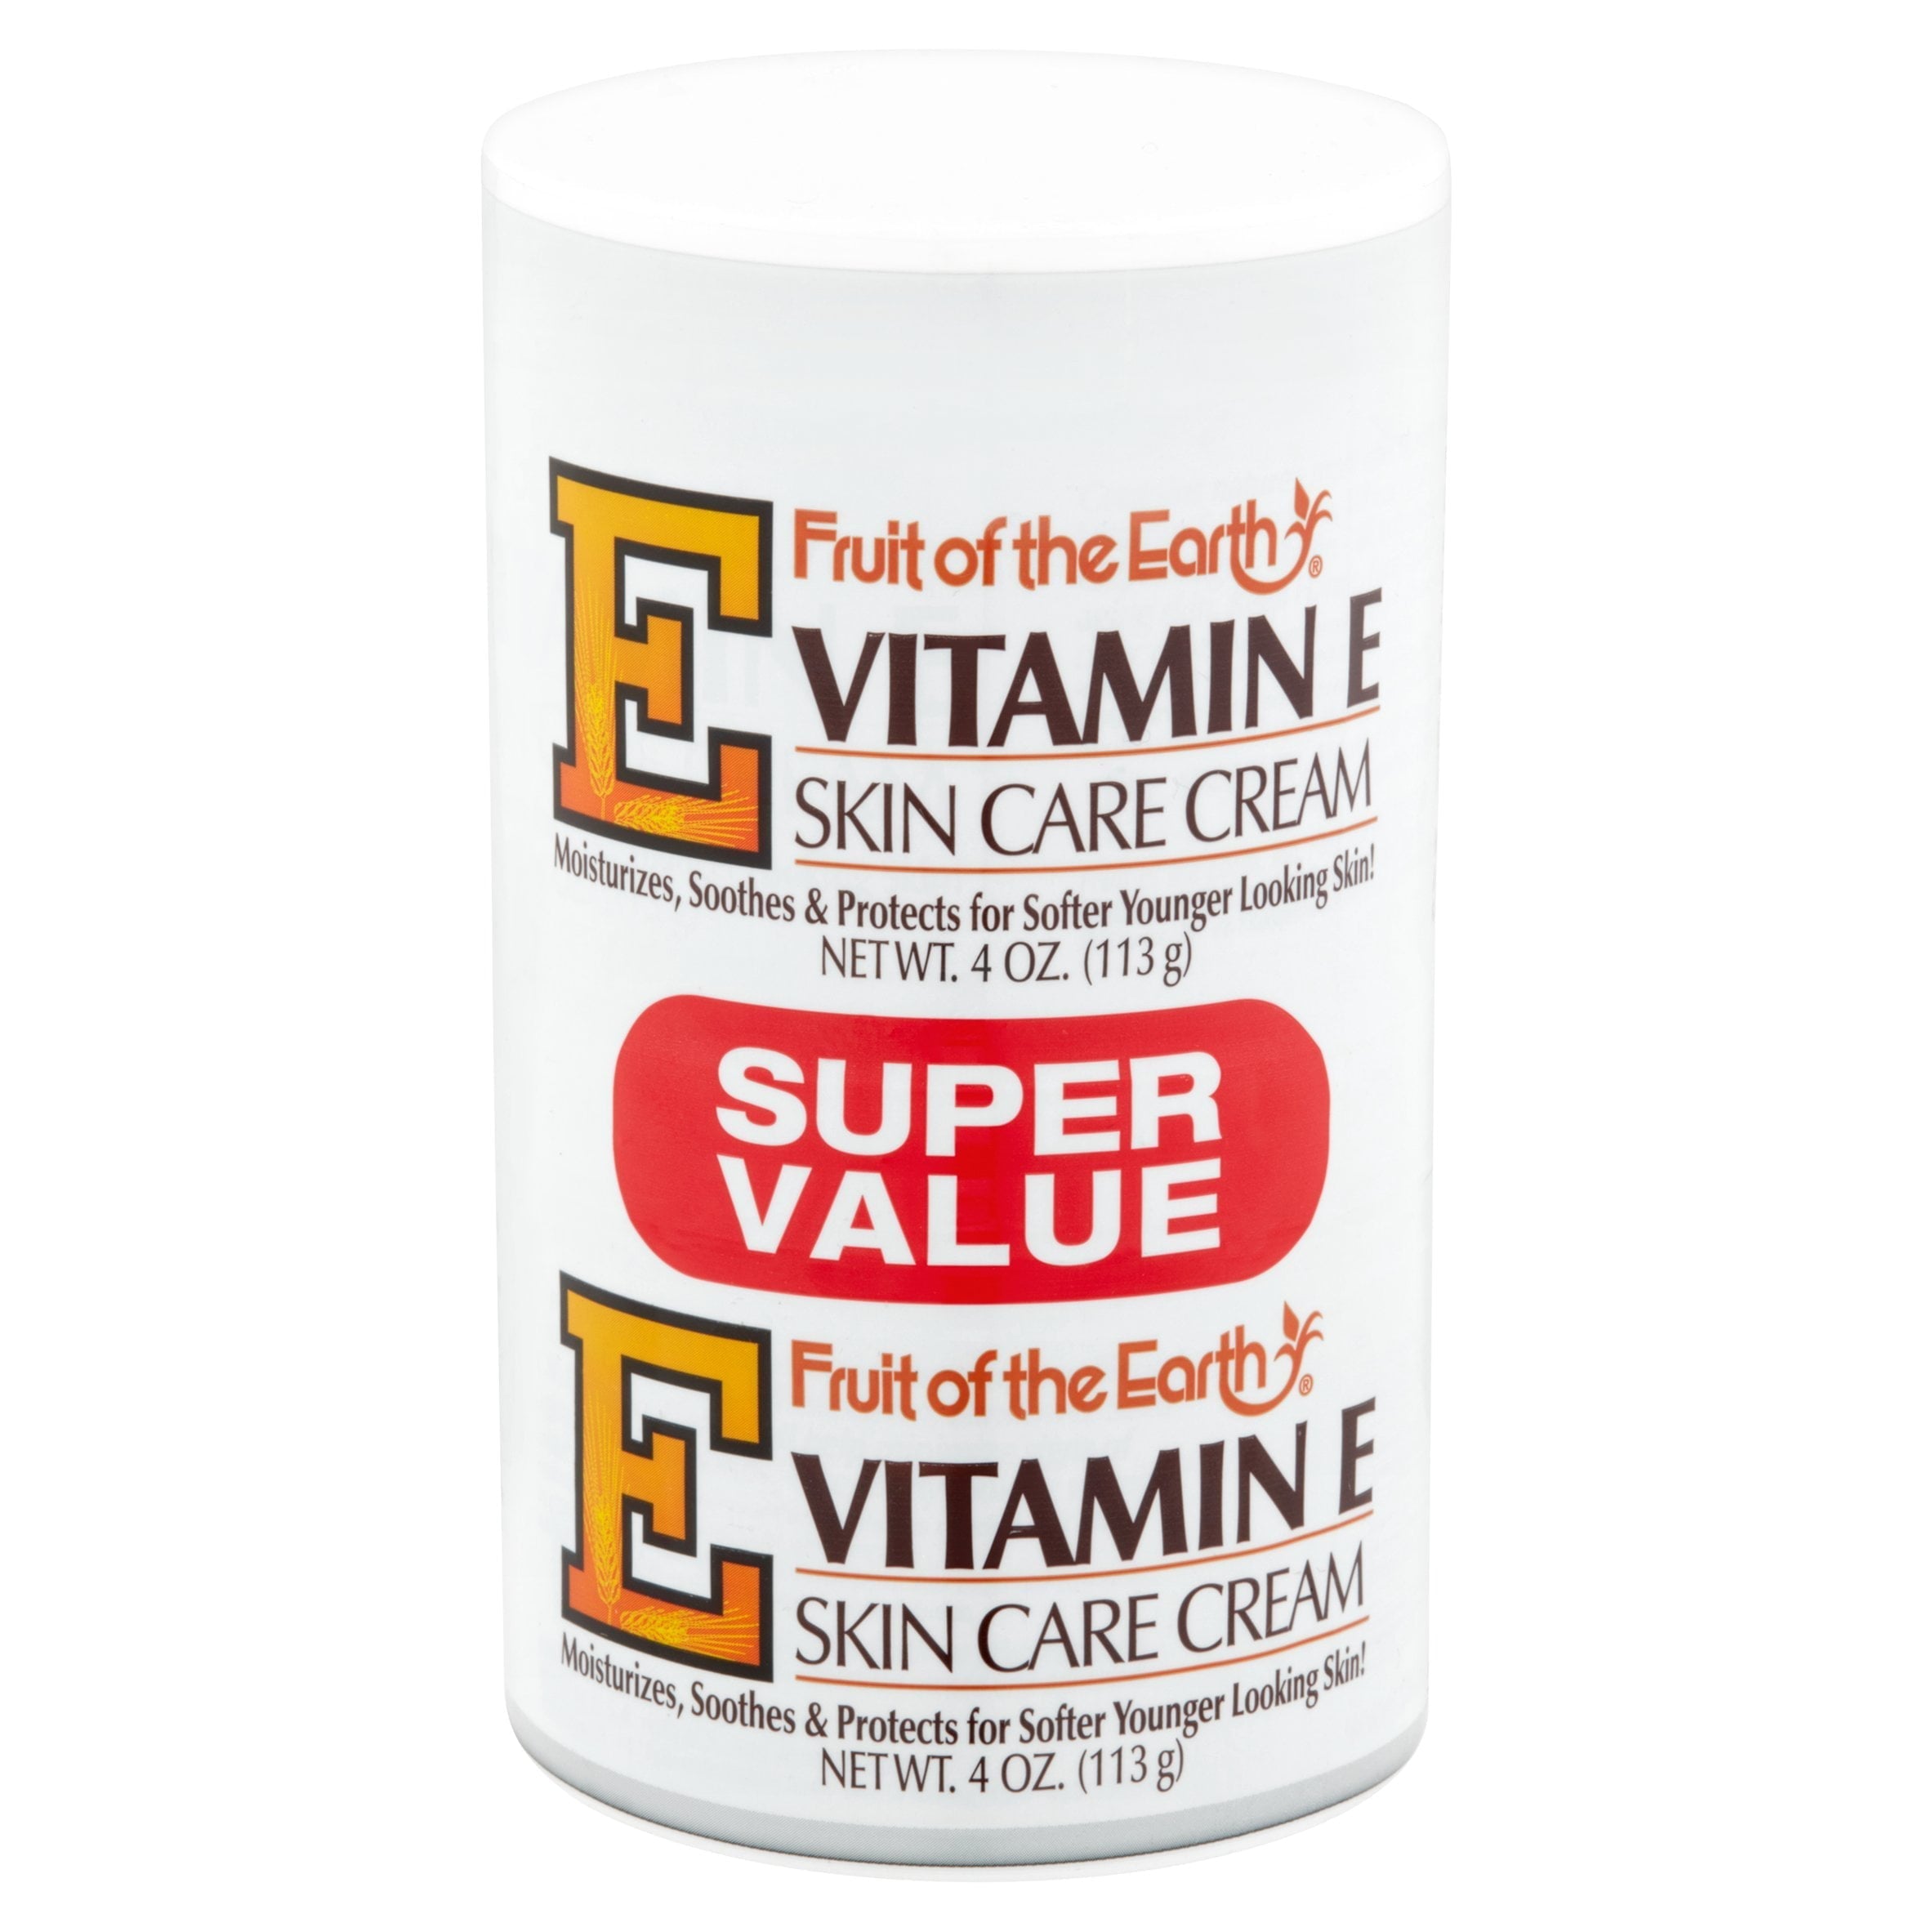 Wholesale prices with free shipping all over United States Fruit of the Earth Vitamin E Skin Care Cream Super Value, 4 Oz., 2 pack - Steven Deals